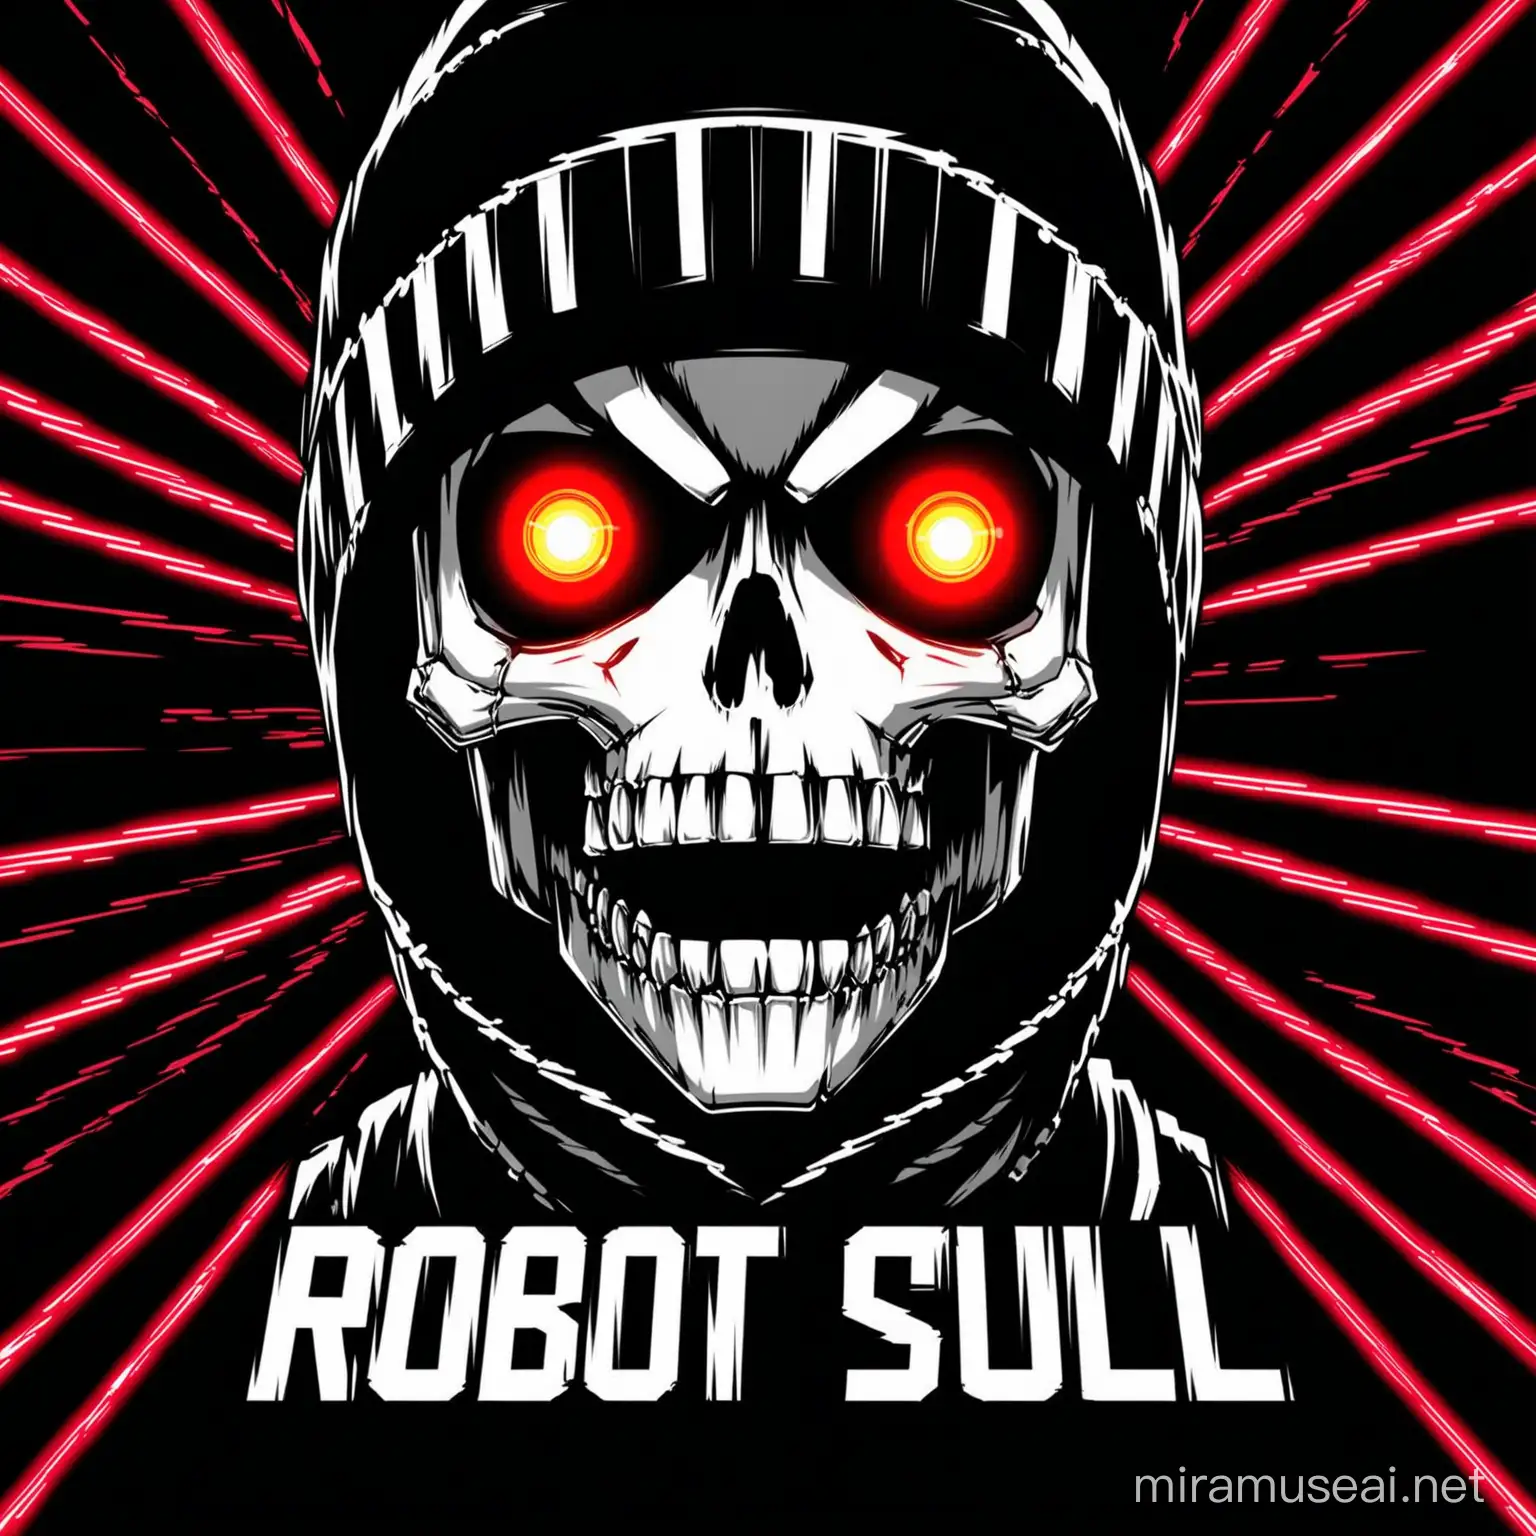 Futuristic Robot Skull with Red Laser Eyes and Anime Text Style on Black Background